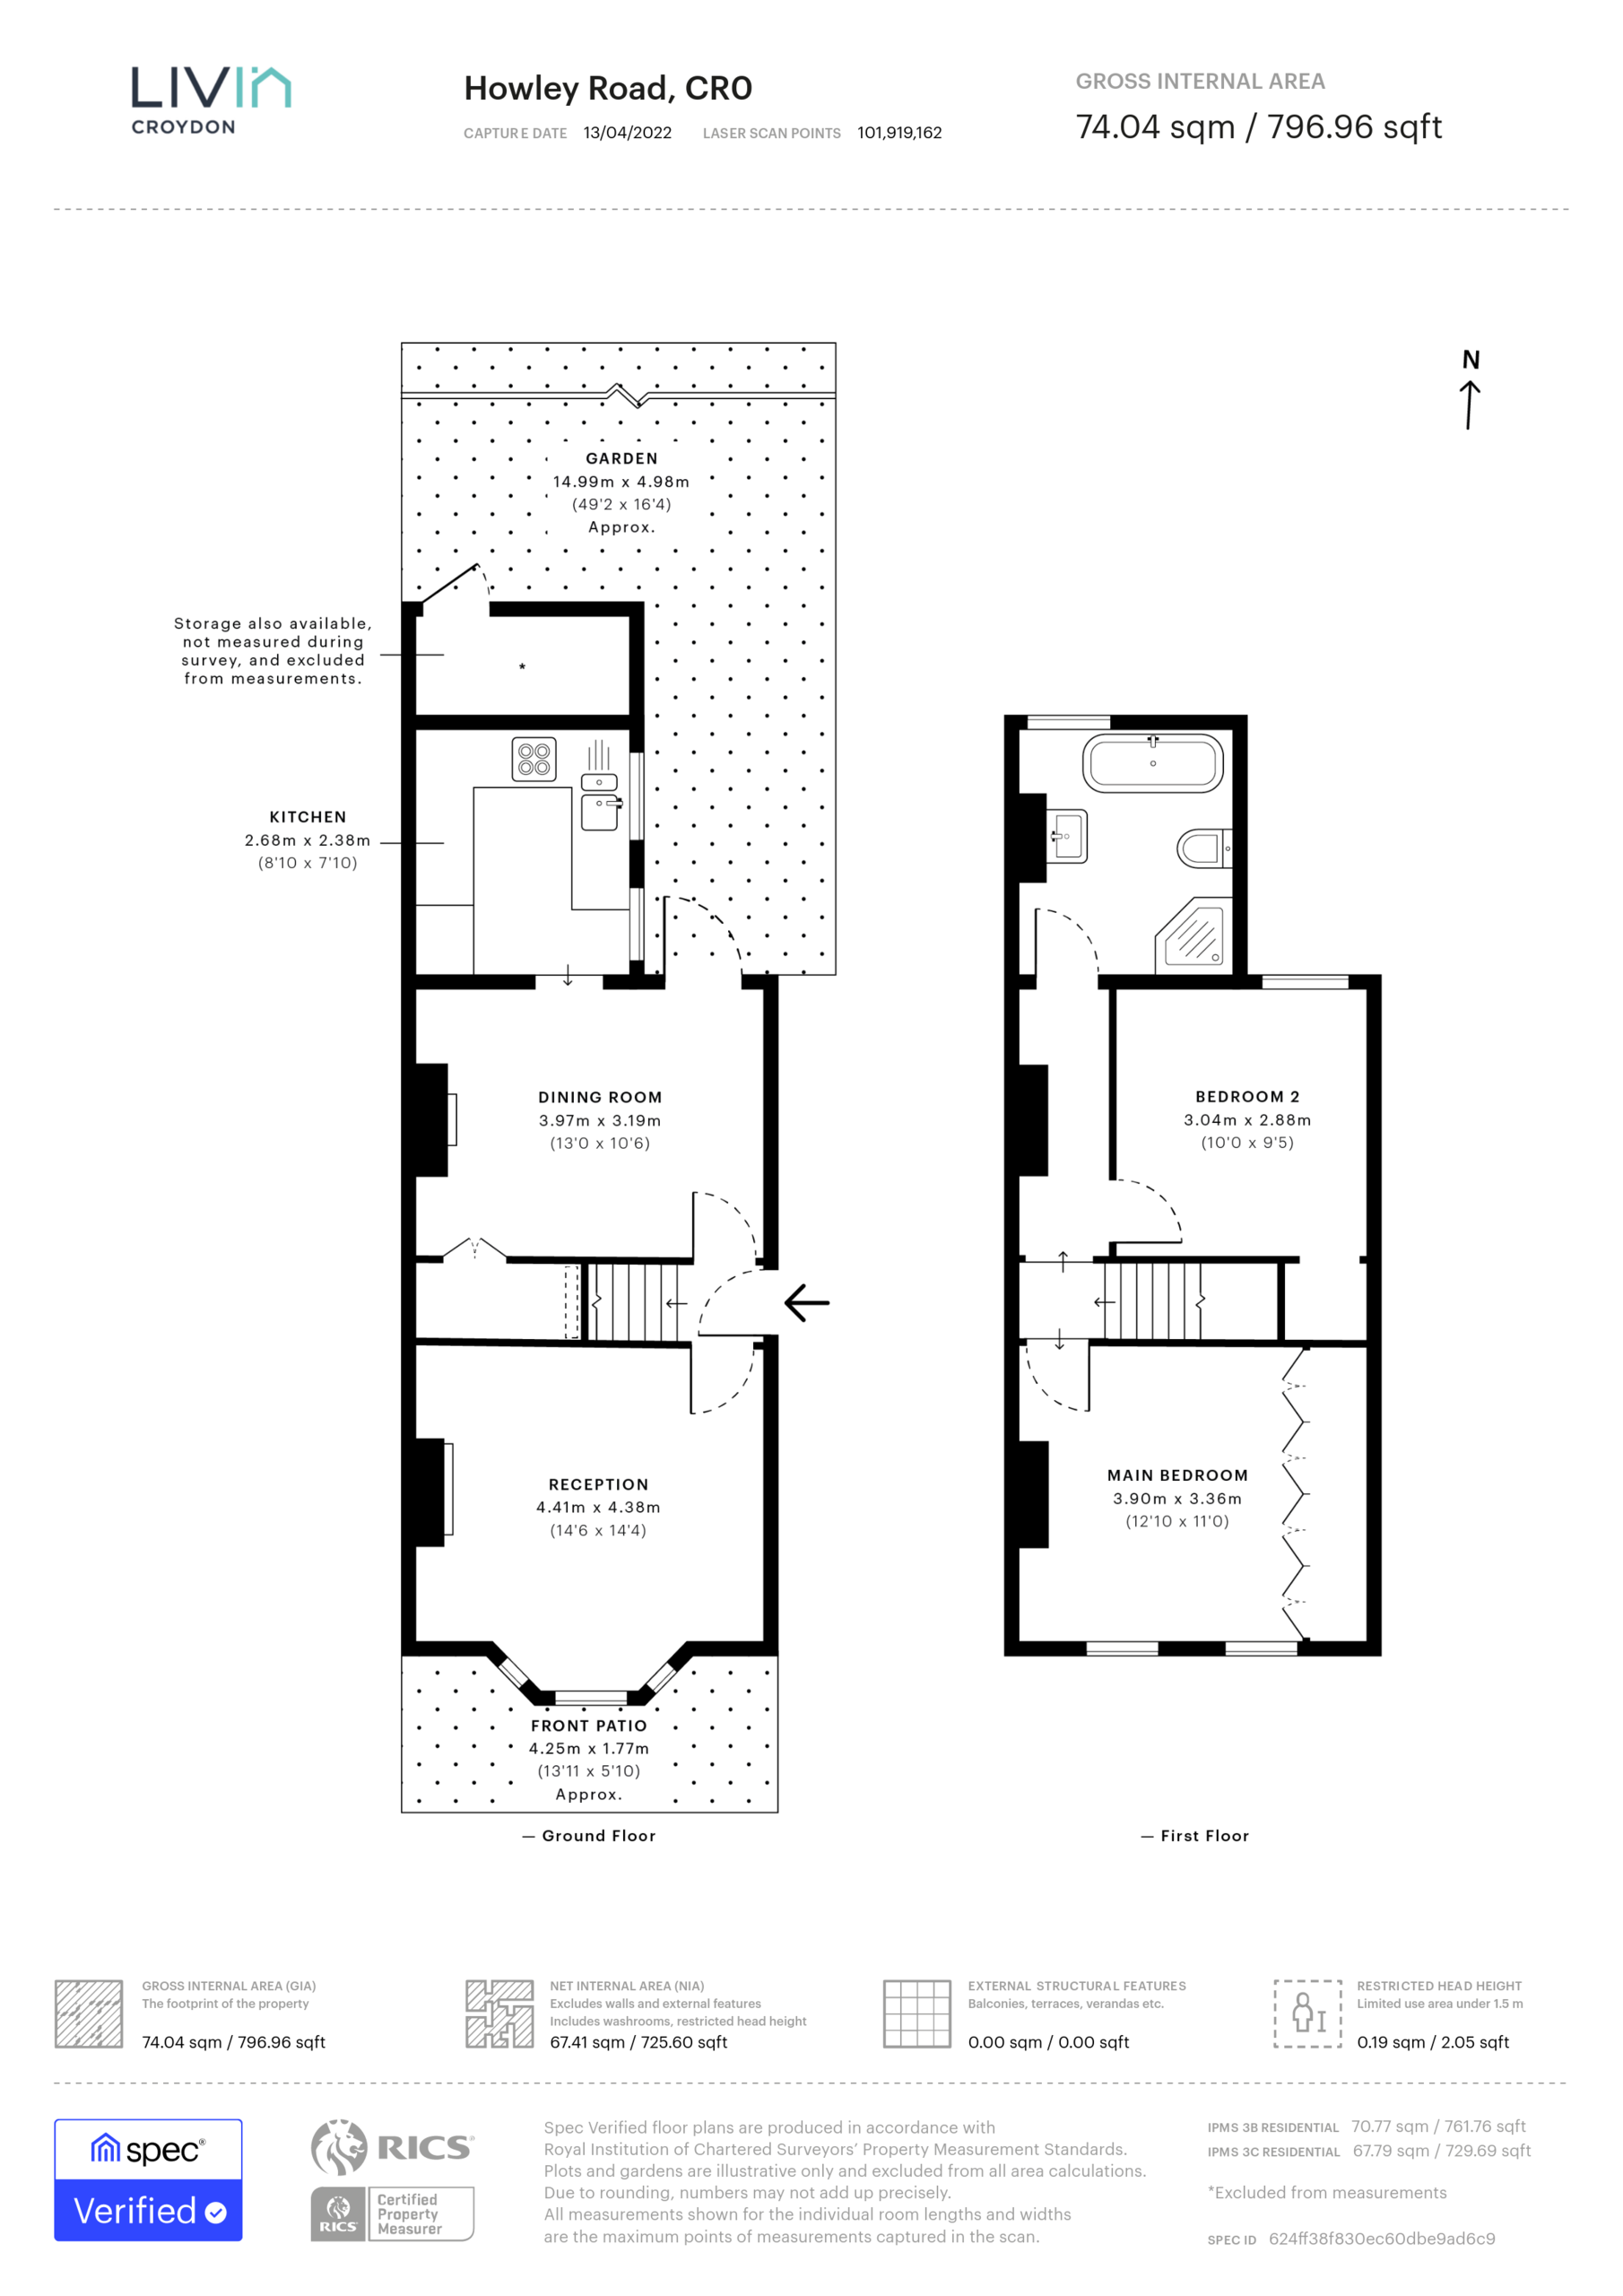 2 bed semi-detached house for sale in Howley Road, Croydon - Property floorplan